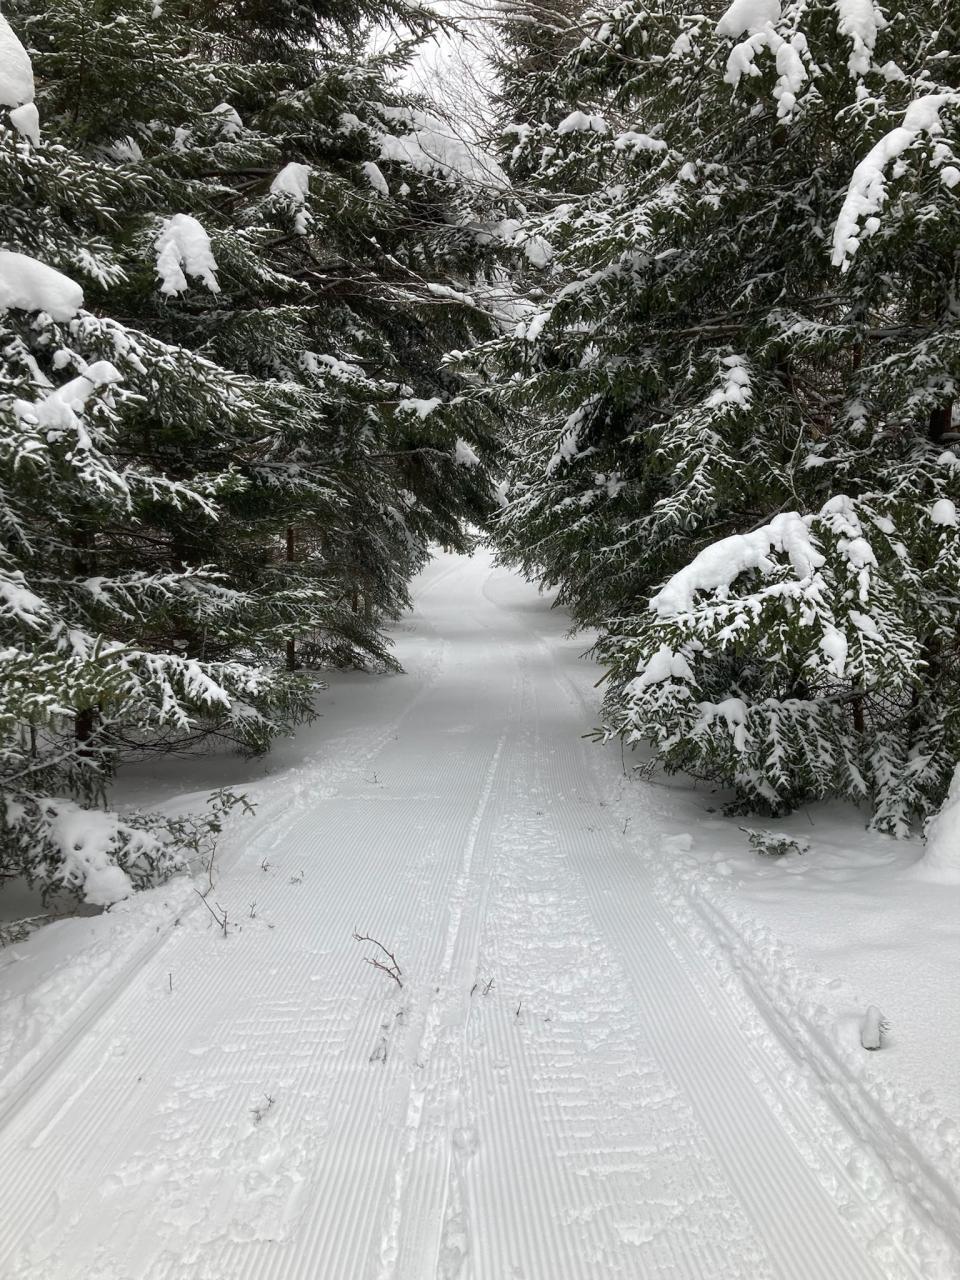 A snow covered cross-country ski trail with snow on the pines